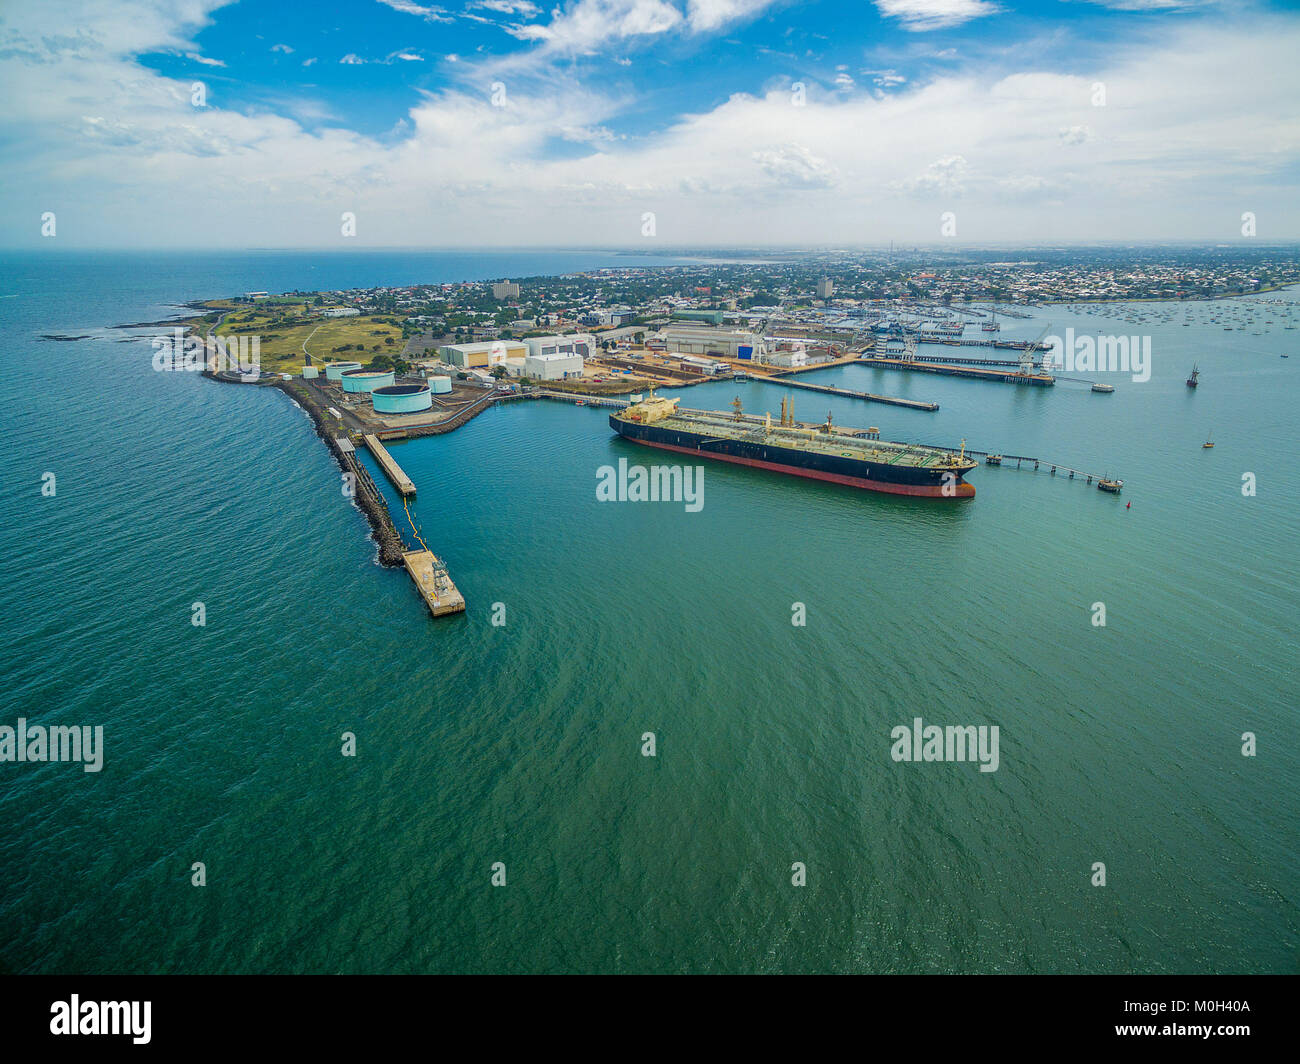 Aerial view of industrial docks and nautical vessel at Yarra river mouth. Williamstown, Melbourne, Australia Stock Photo